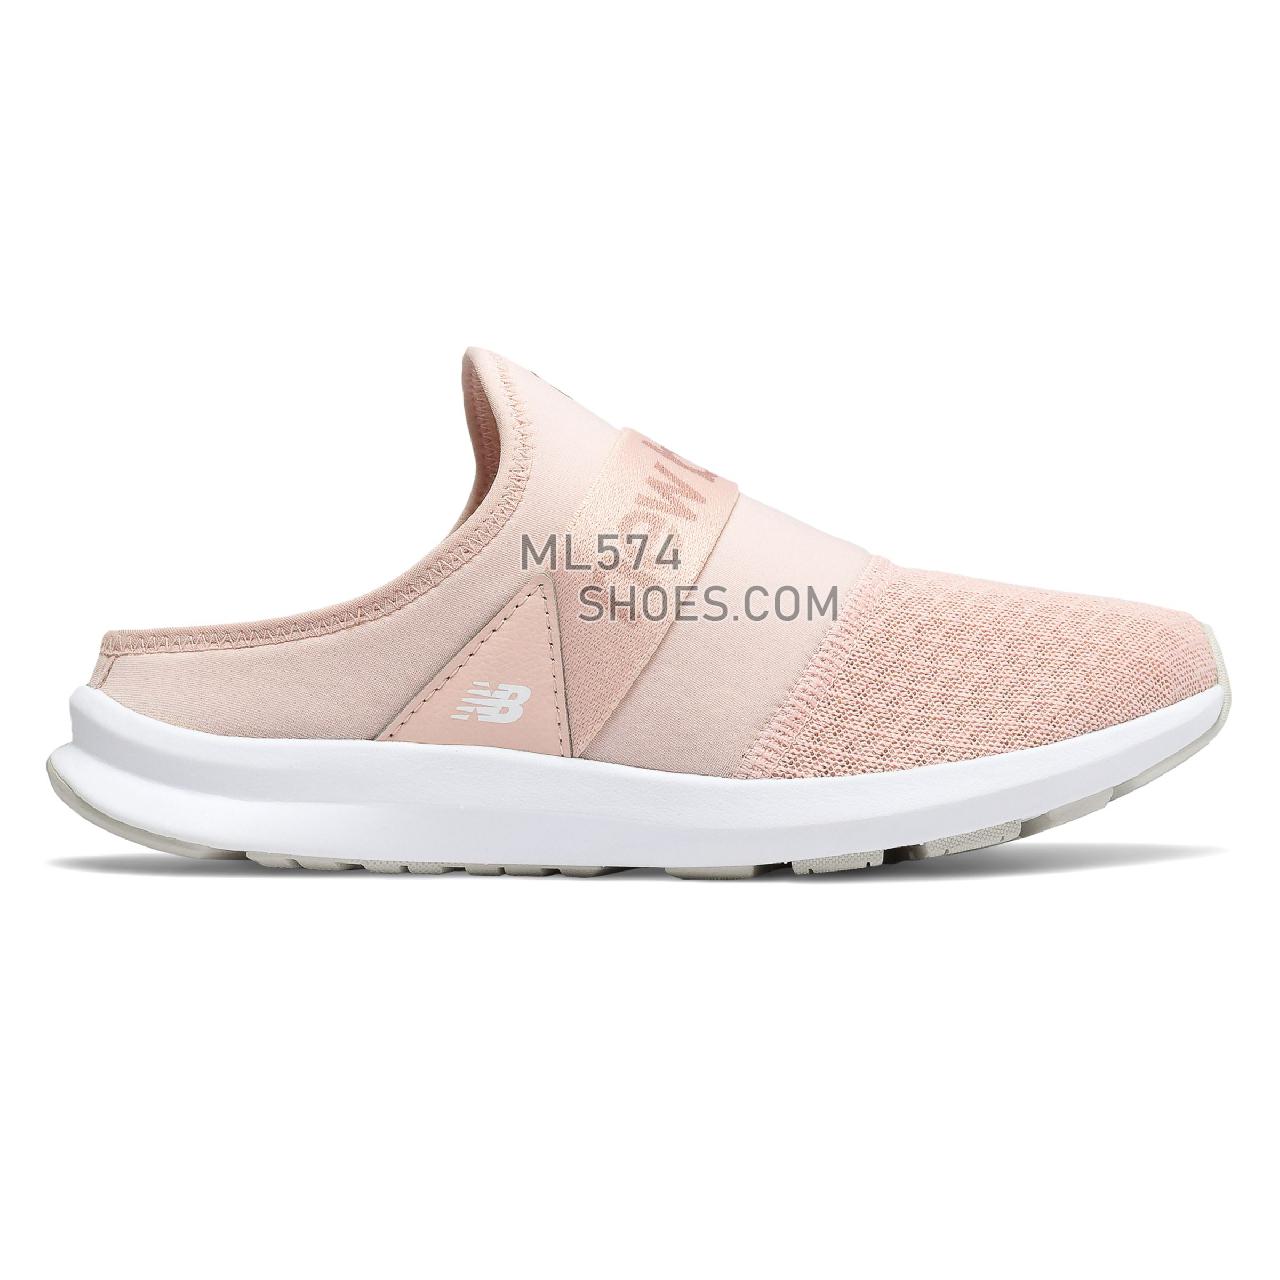 New Balance FuelCore Nergize Mule - Women's Sport Style Sneakers - Oyster Pink with Pink Mist - WLNRMLP1